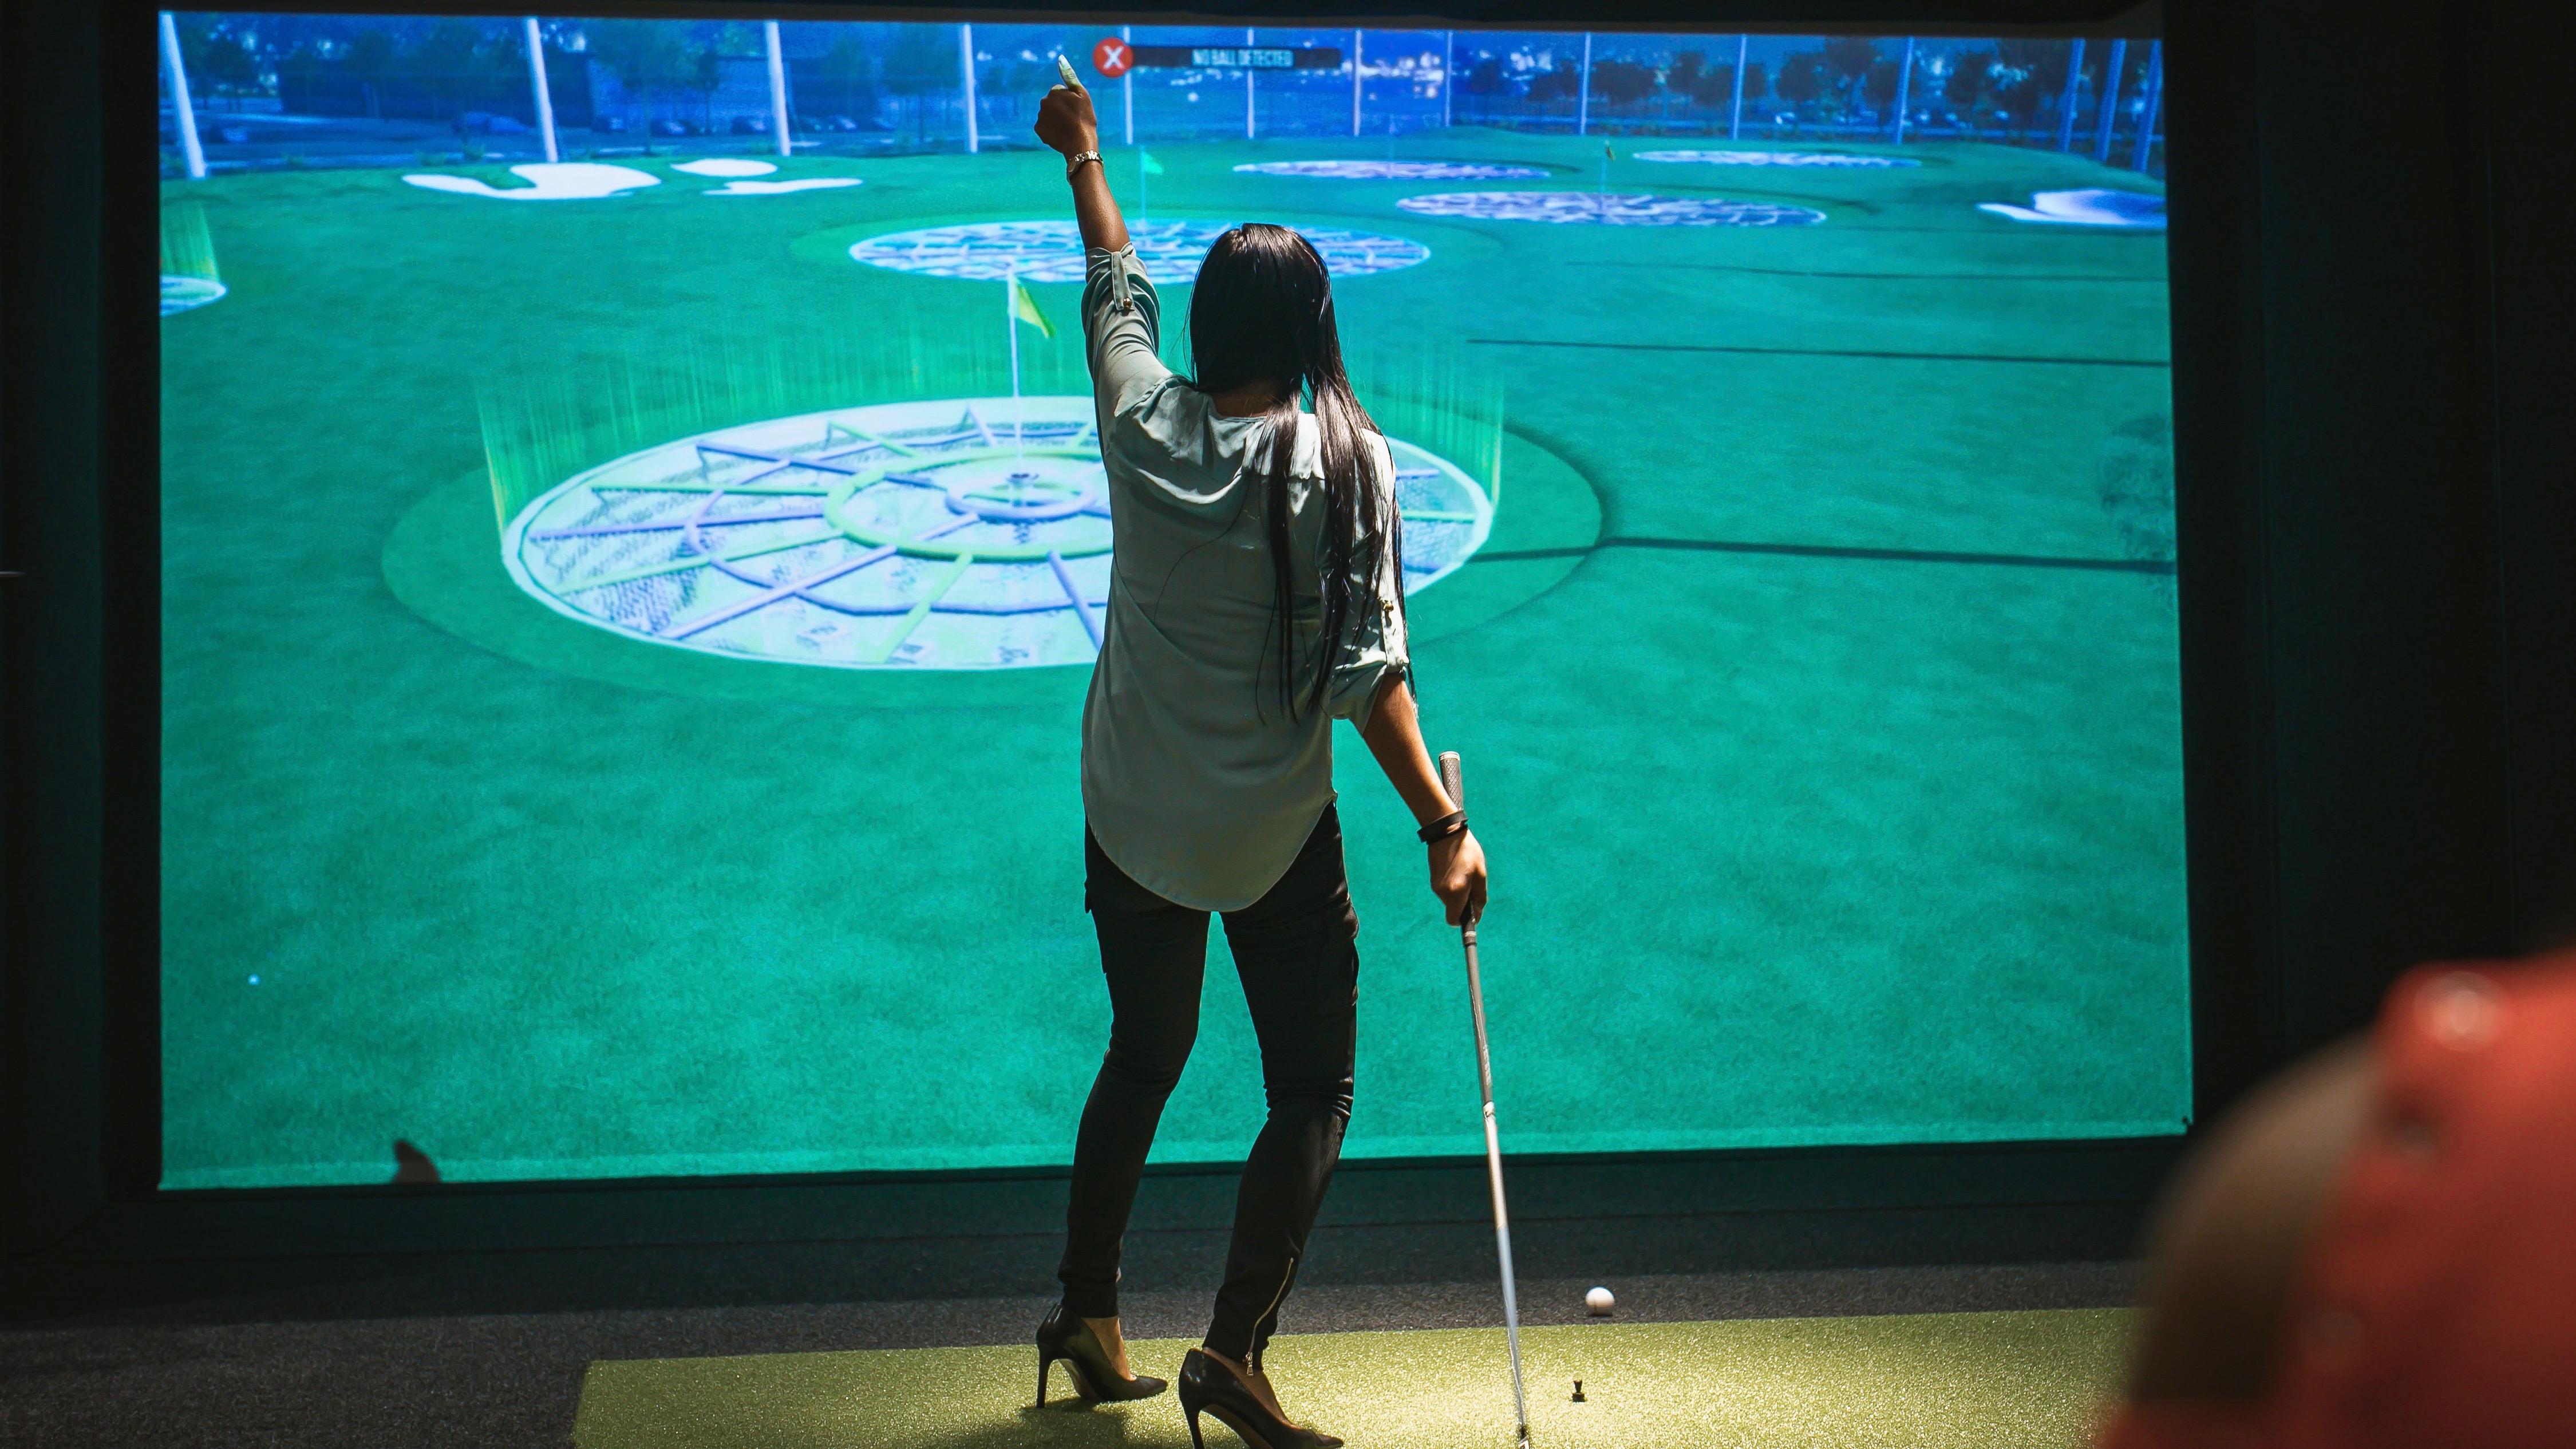 Enter to Win a Complimentary Round at Topgolf Swing Suite